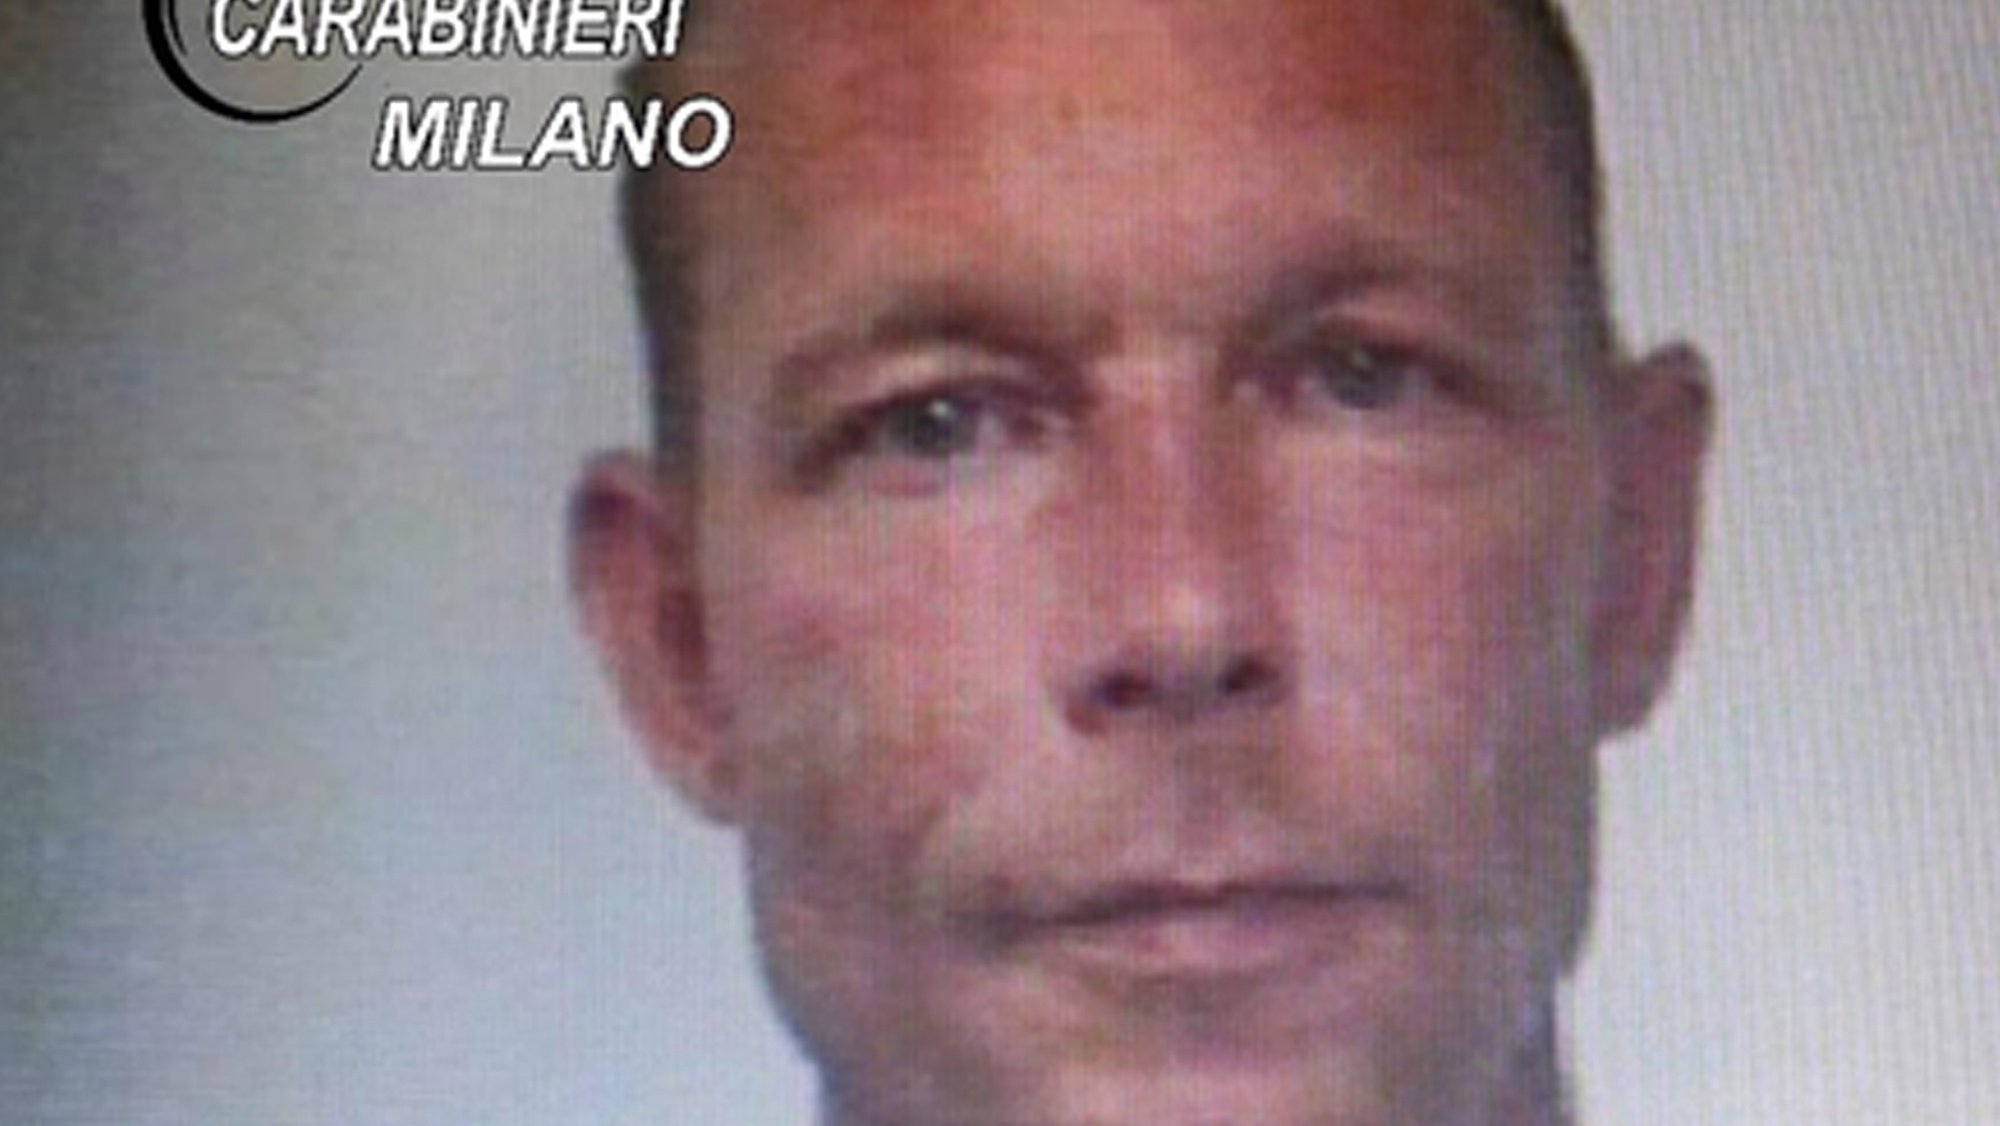 epa08467809 A handout photo made available by the Milan branch of Italy&#039;s Carabinieri police force shows an undated photograph of 43-year-old German convict Christian Brueckner, whom investigators are treating as the main suspect in the as-yet-unsolved case of the 2007 disappearance of British child Madeleine McCann in Portugal (issued 05 June 2020). German prosecutors said they were investigating whether Brueckner might also be linked to another missing child case in Germany. The McCann family was vacationing in the southern Portuguese Algarve region when Madeleine vanished without a trace a few days shy of her fourth birthday on 03 May 2007 from the bedroom where she was sleeping together with her two younger twin brothers. The girl&#039;s disappearance received global media attention at the time; 13 years later, new leads have prompted German police to name Brueckner, who is currently imprisoned for unrelated crimes, as a new suspect in the cold case that once gripped the world.  EPA/CARABINIERI HANDOUT  HANDOUT EDITORIAL USE ONLY/NO SALES